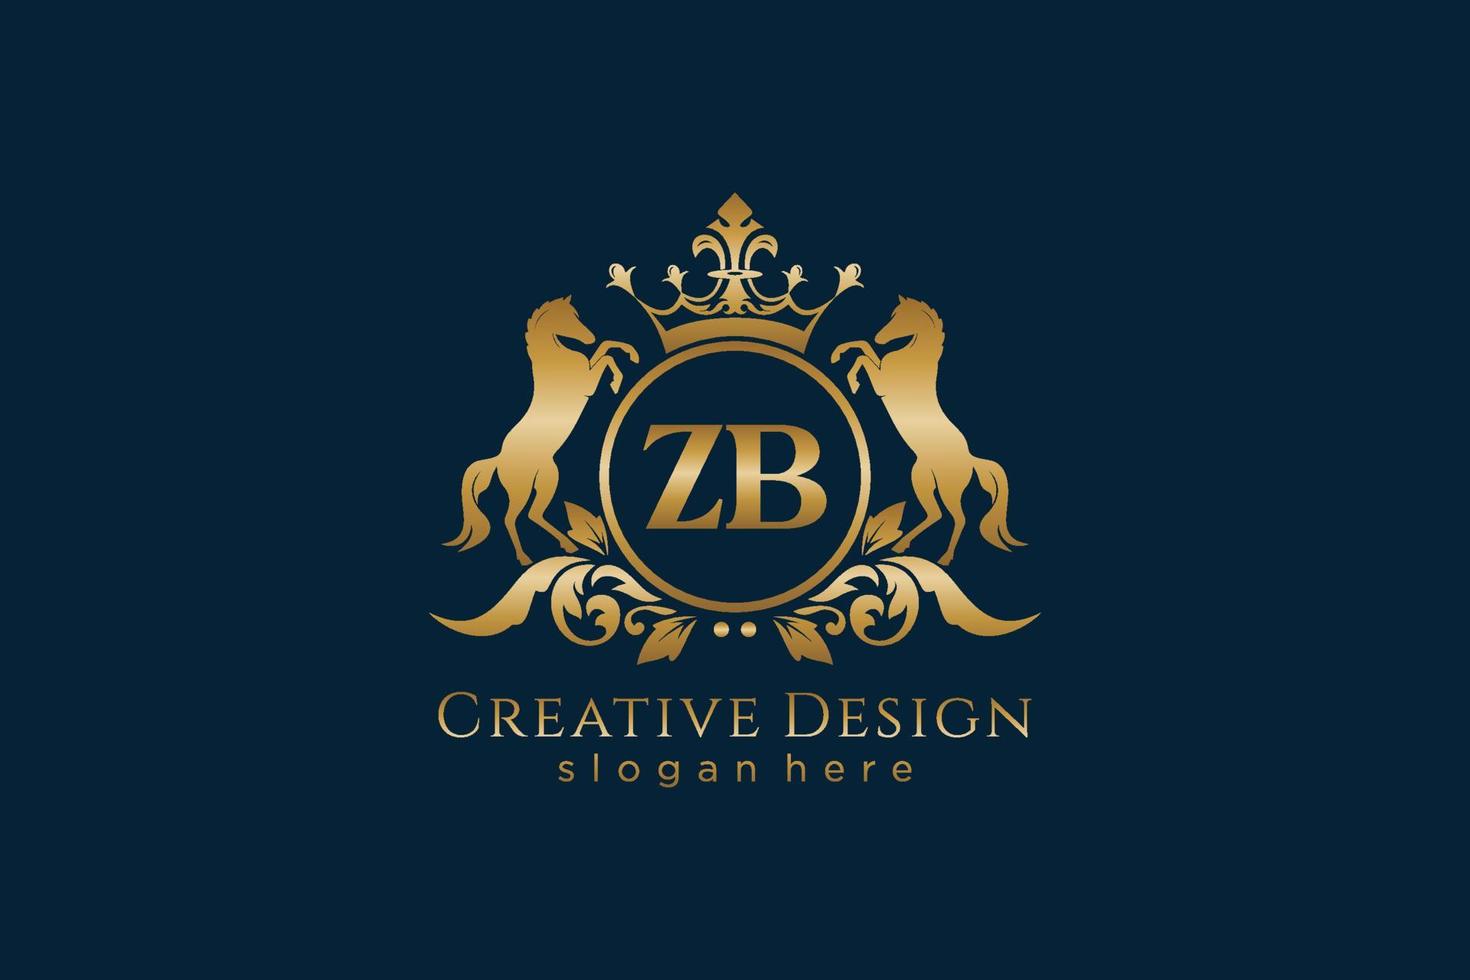 initial ZB Retro golden crest with circle and two horses, badge template with scrolls and royal crown - perfect for luxurious branding projects vector